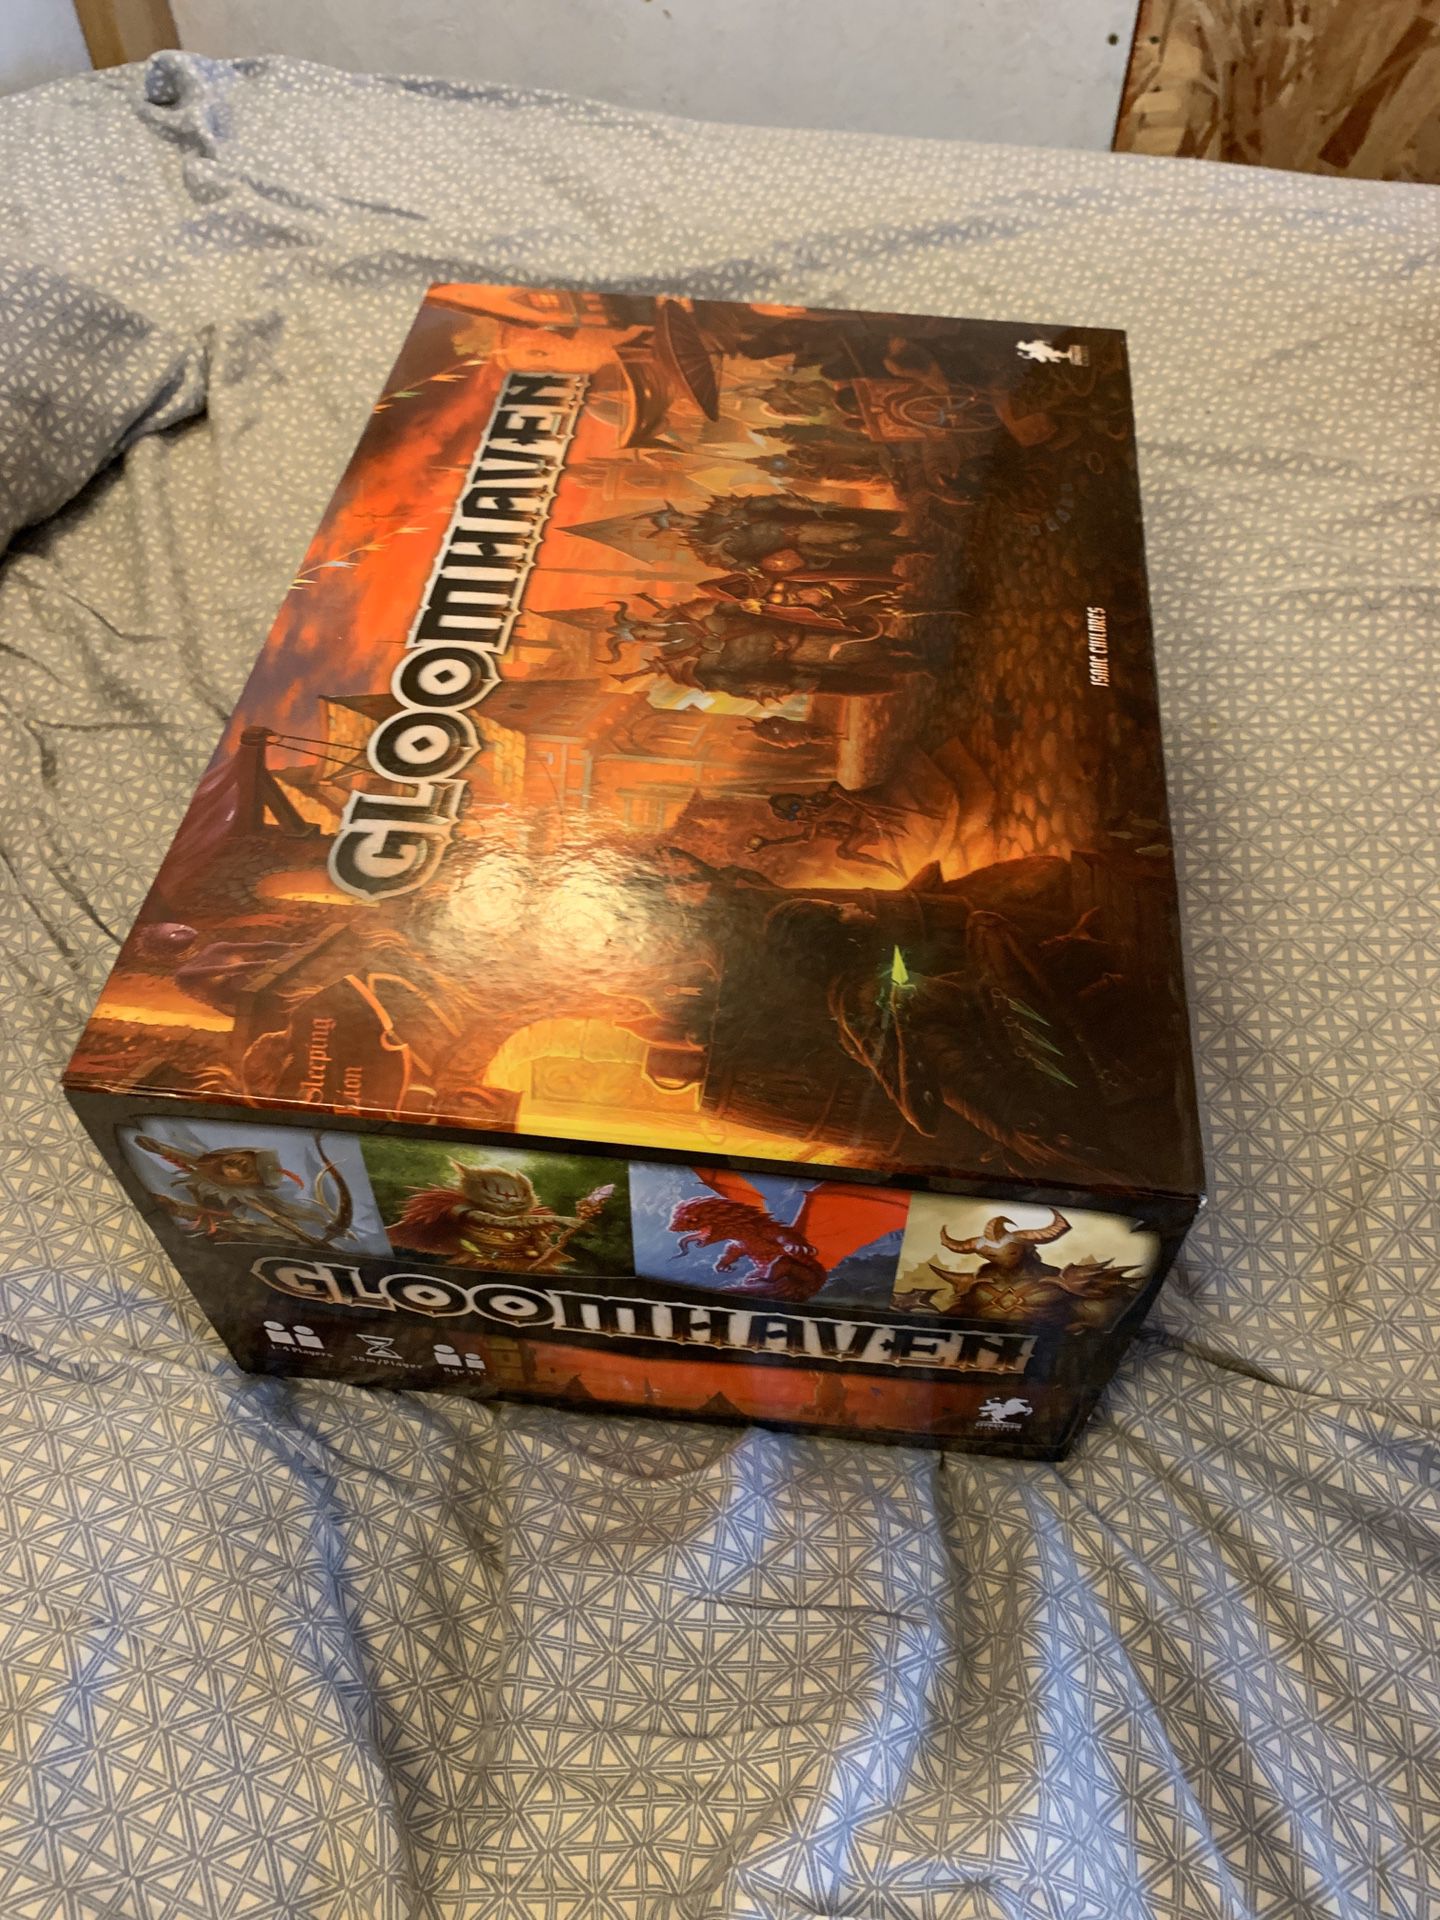 Gloomhaven Board Game w/ Insert and replaceable stickers